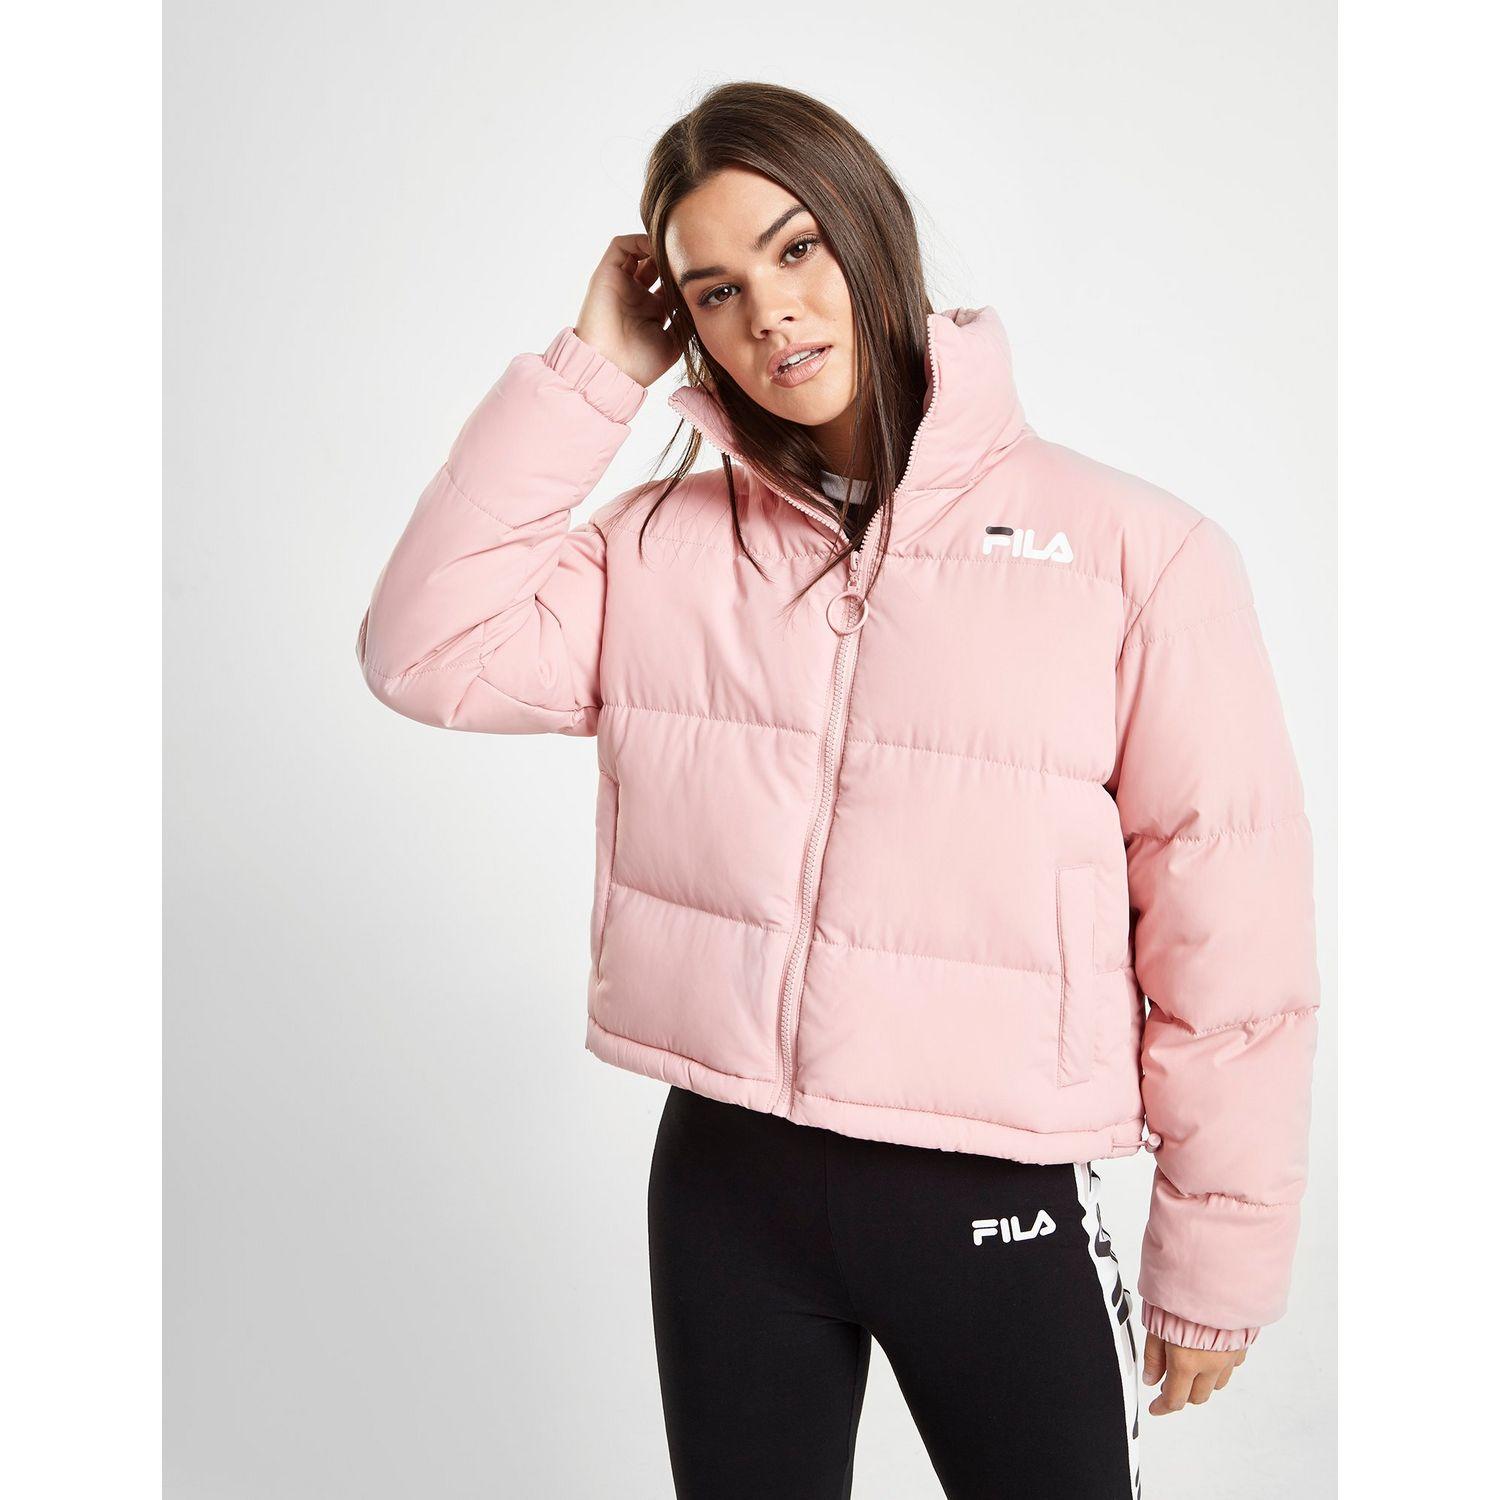 fila pink puffer jacket OFF 65% - Online Shopping Site for Fashion &  Lifestyle.